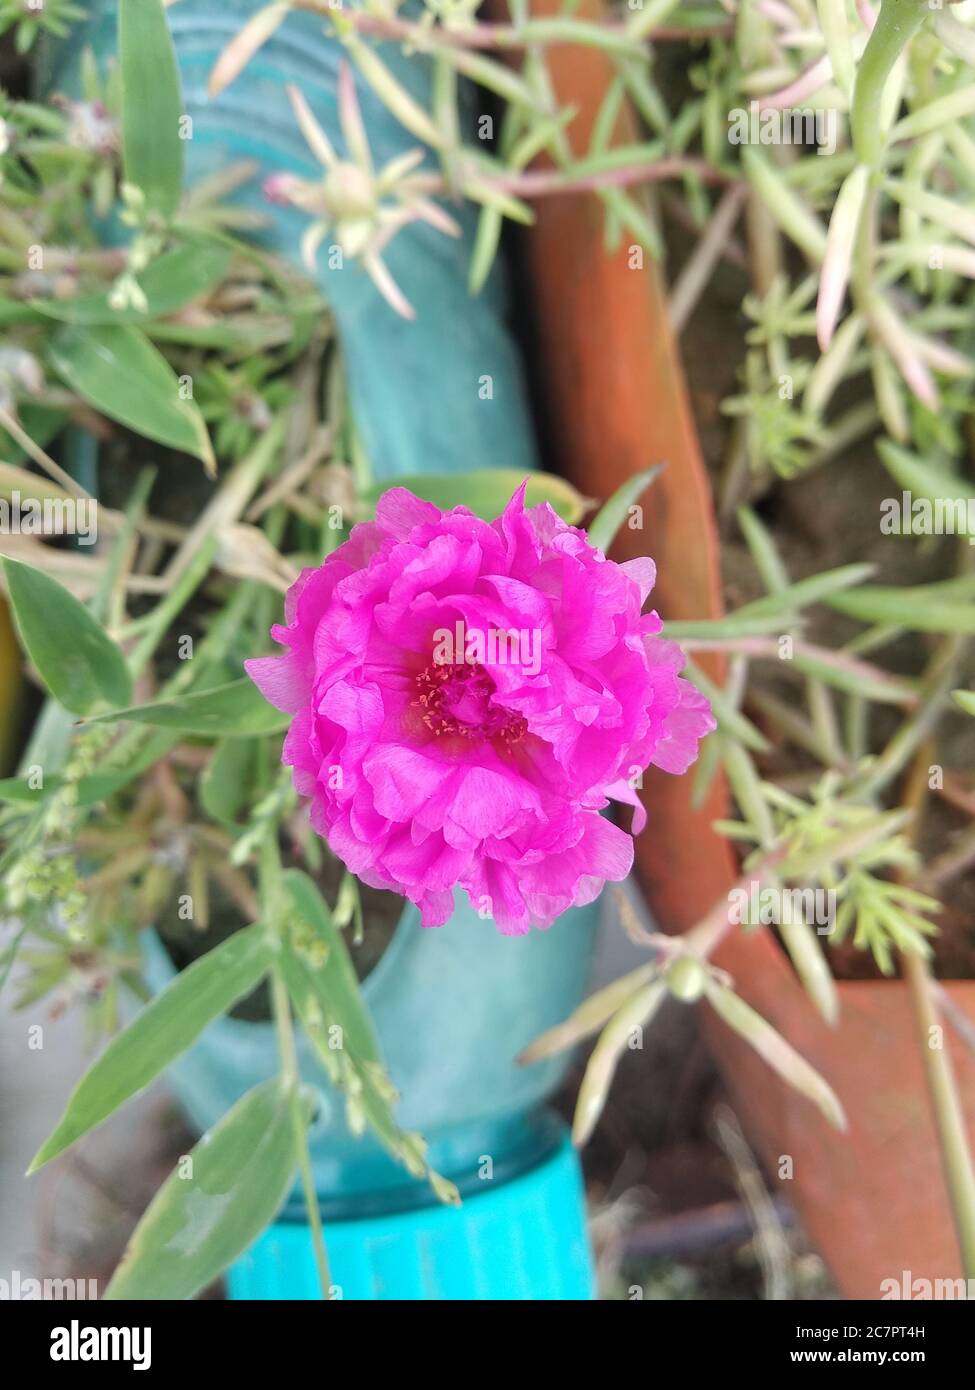 Portulaca grandiflora (Portulaca, Moss Rose, Sun plant, Sun Rose) ; A colorful blossom, petals stacked overlapping in layers which variable and multi- Stock Photo